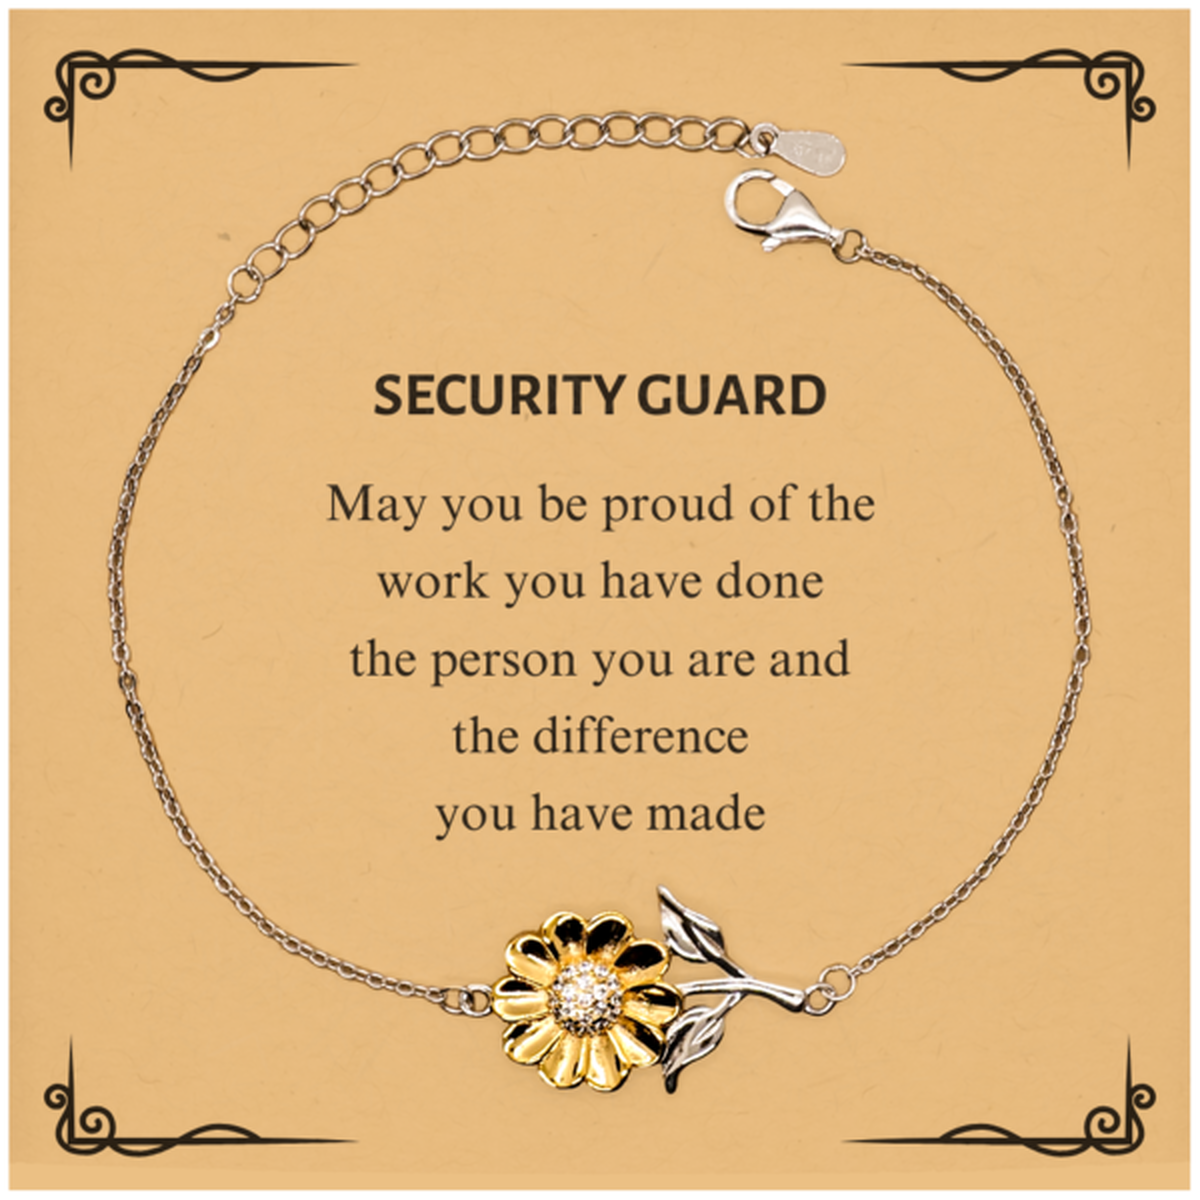 Security Guard May you be proud of the work you have done, Retirement Security Guard Sunflower Bracelet for Colleague Appreciation Gifts Amazing for Security Guard